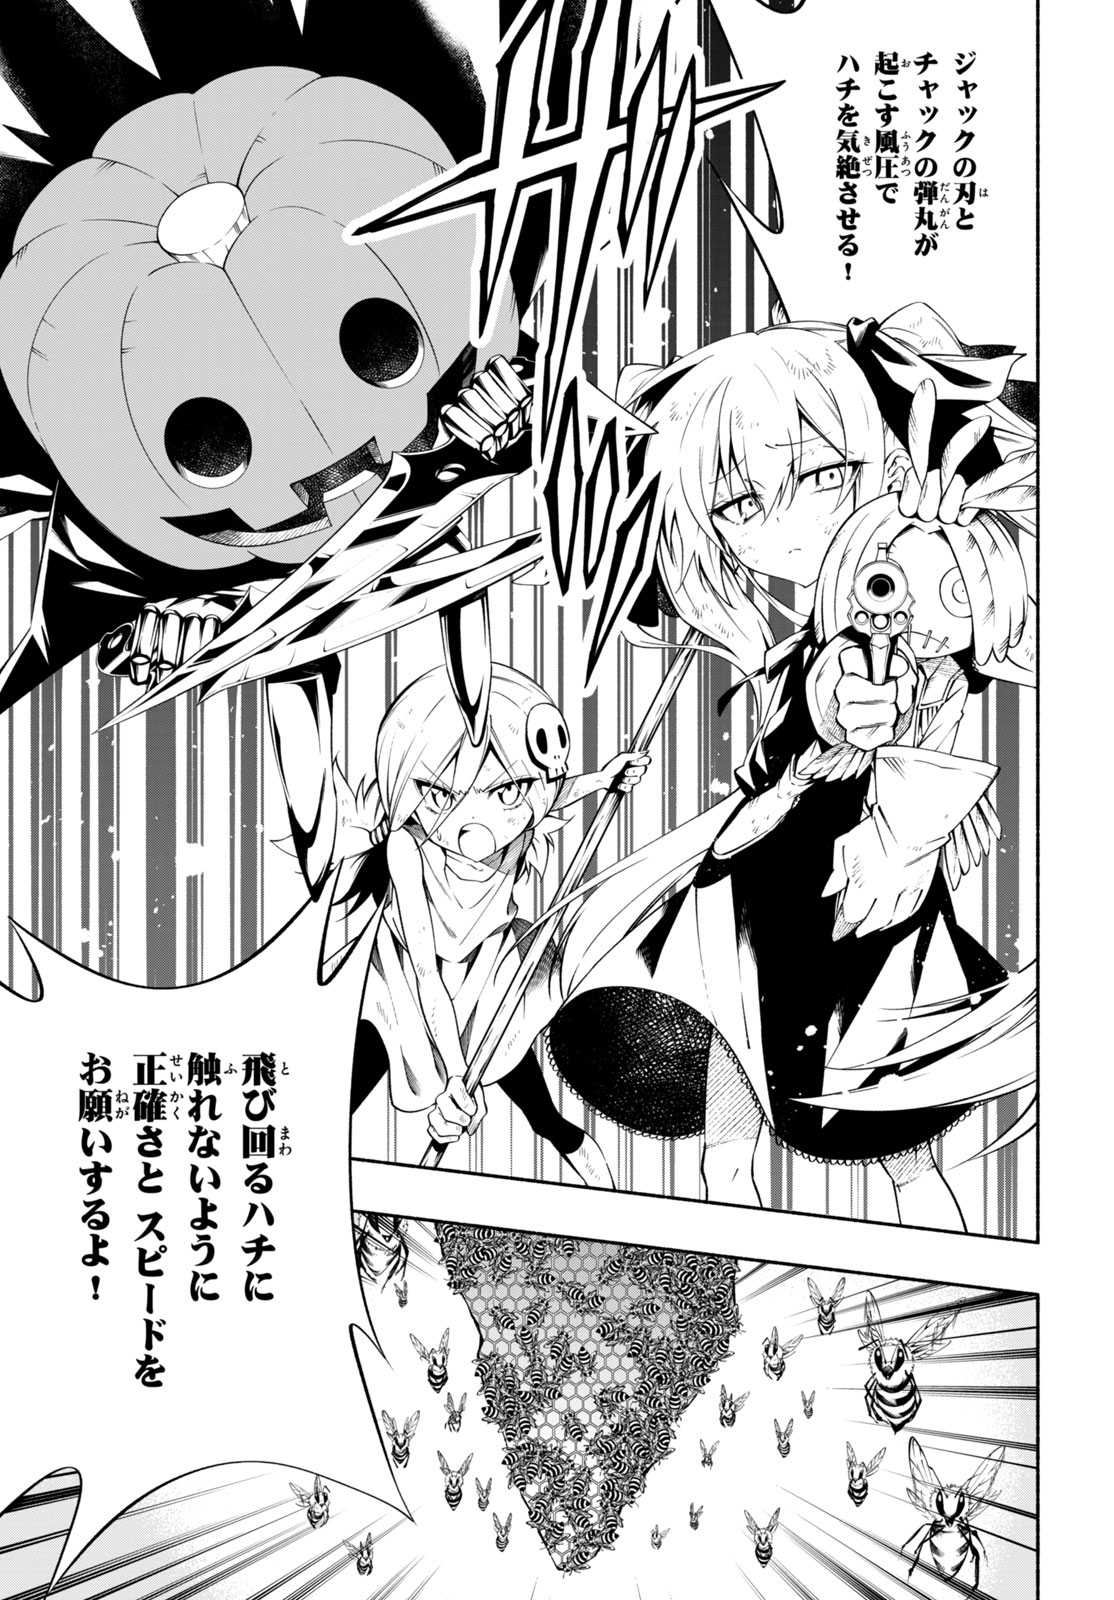 Shaman King: and a garden 第16.2話 - Page 2